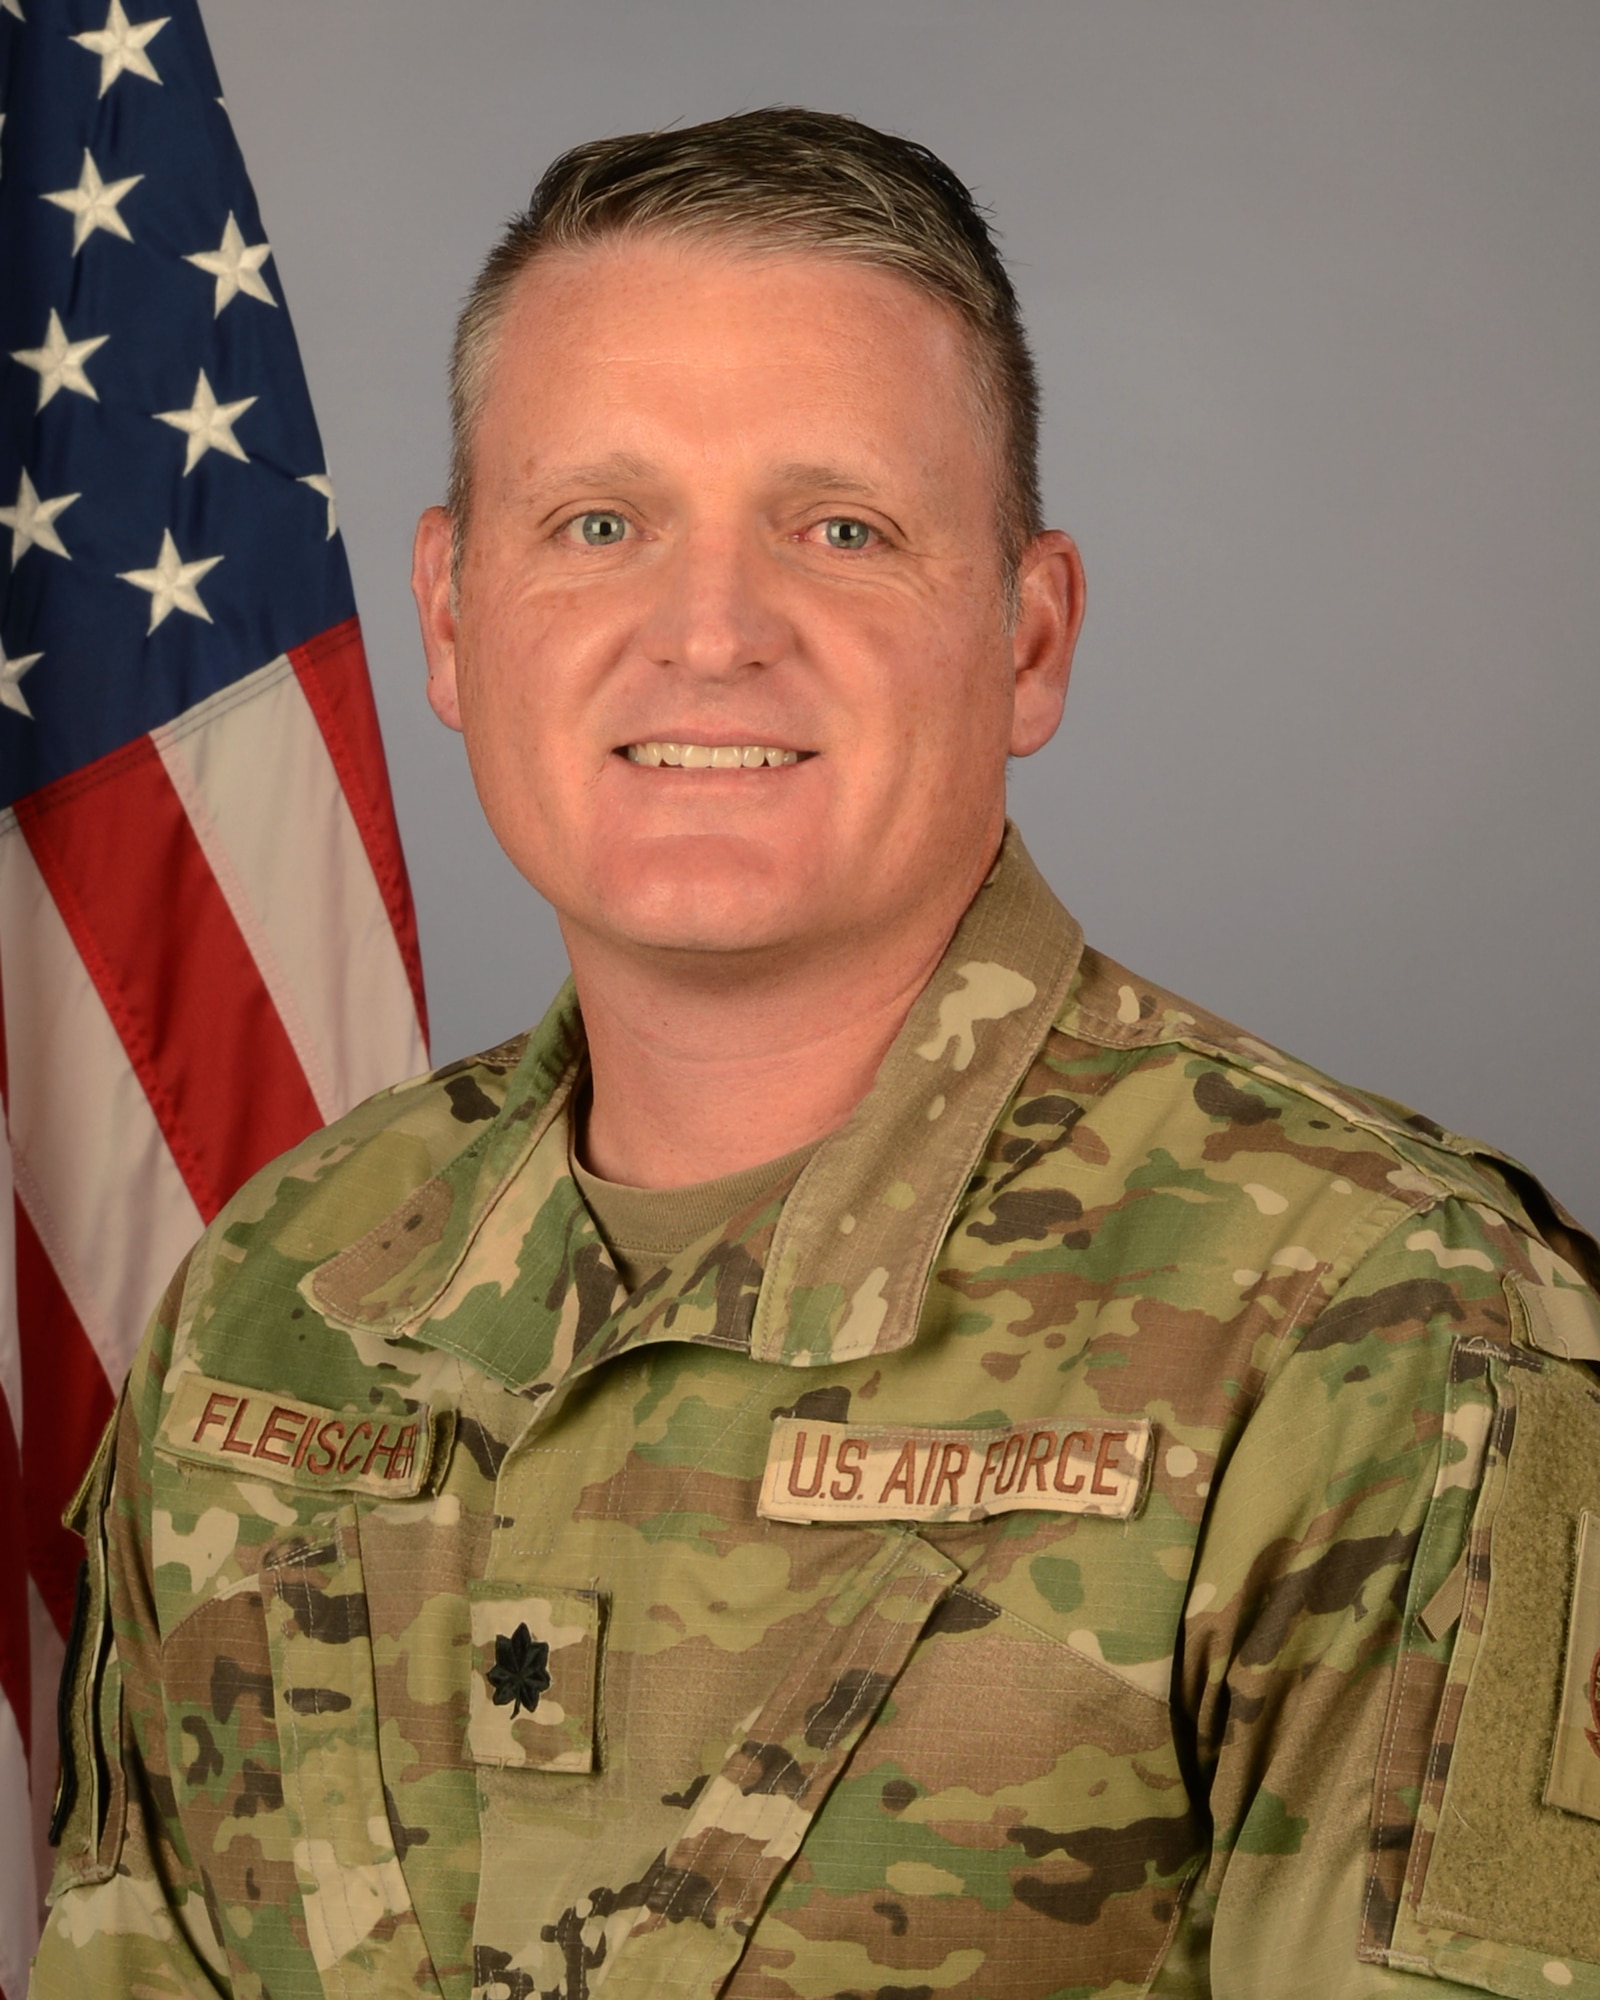 U.S. Air Force Lt. Col. Gareth Fleischer, 169th Civil Engineer Squadron commander at McEntire Joint National Guard Base, South Carolina, Dec. 1, 2021. (U.S. Air National Guard photo by Senior Master Sgt. Edward Snyder, 169th Fighter Wing Public Affairs)